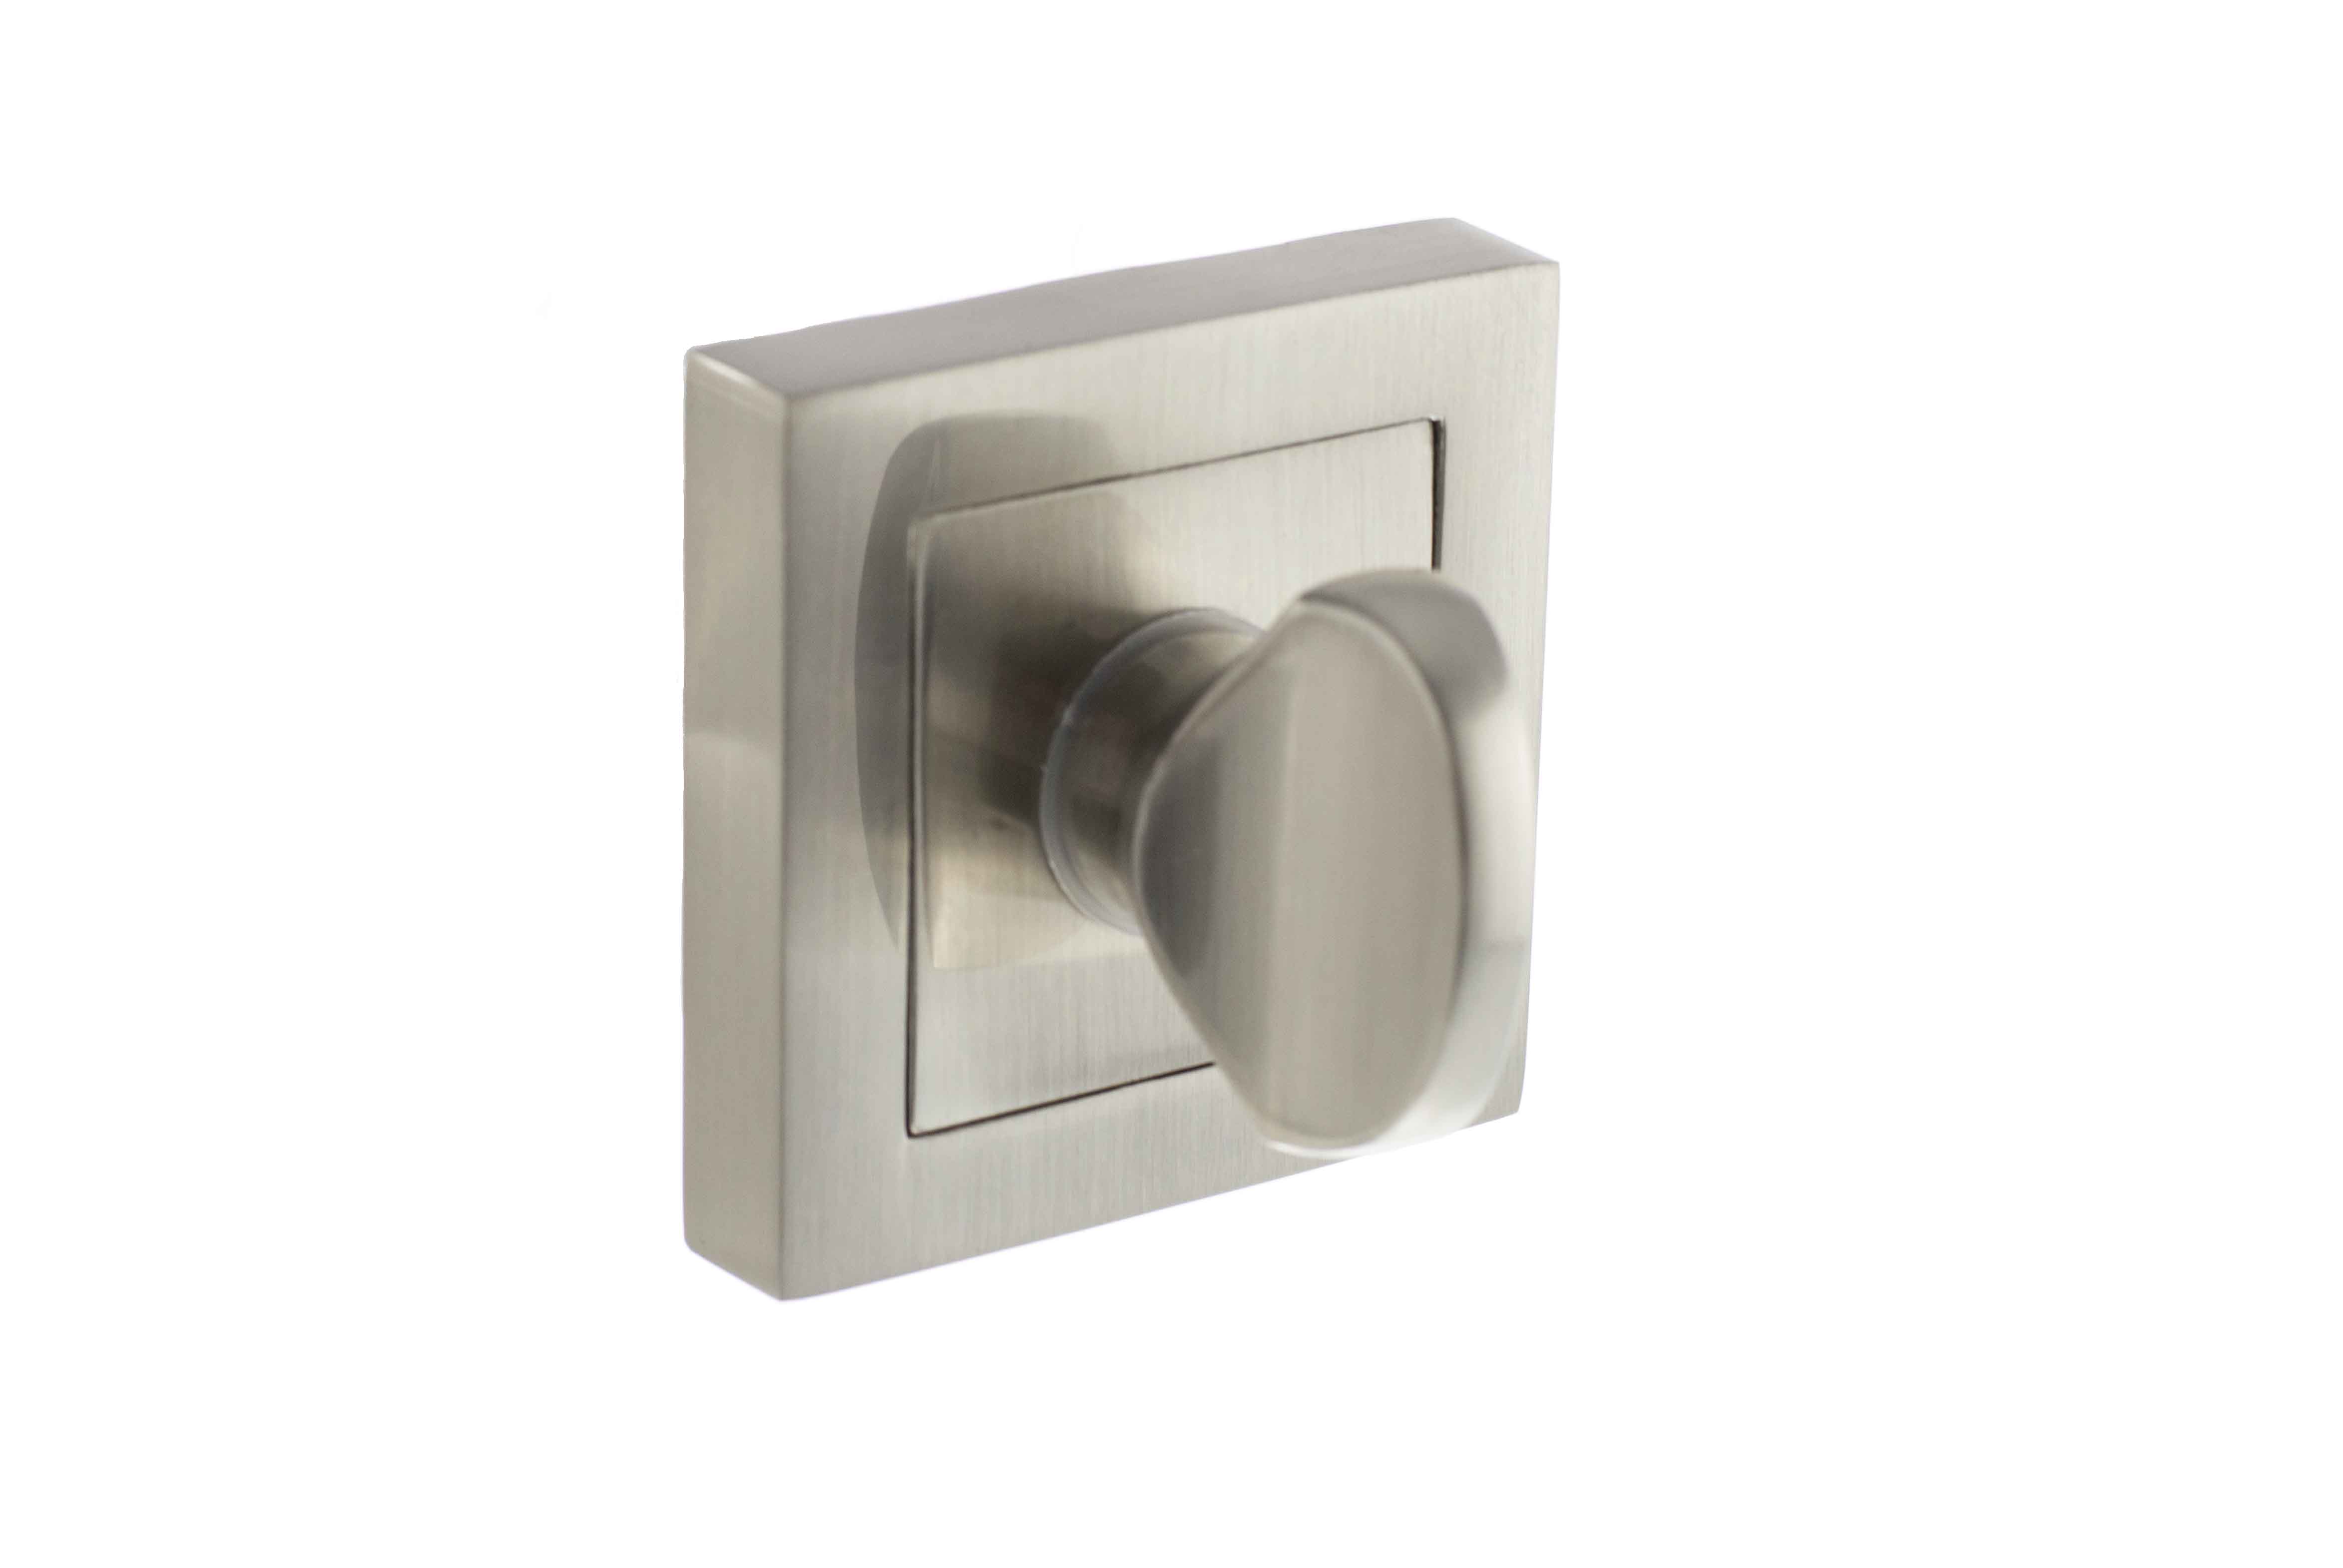 STATUS WC Turn and Release on S4 Square Rose - Satin Nickel